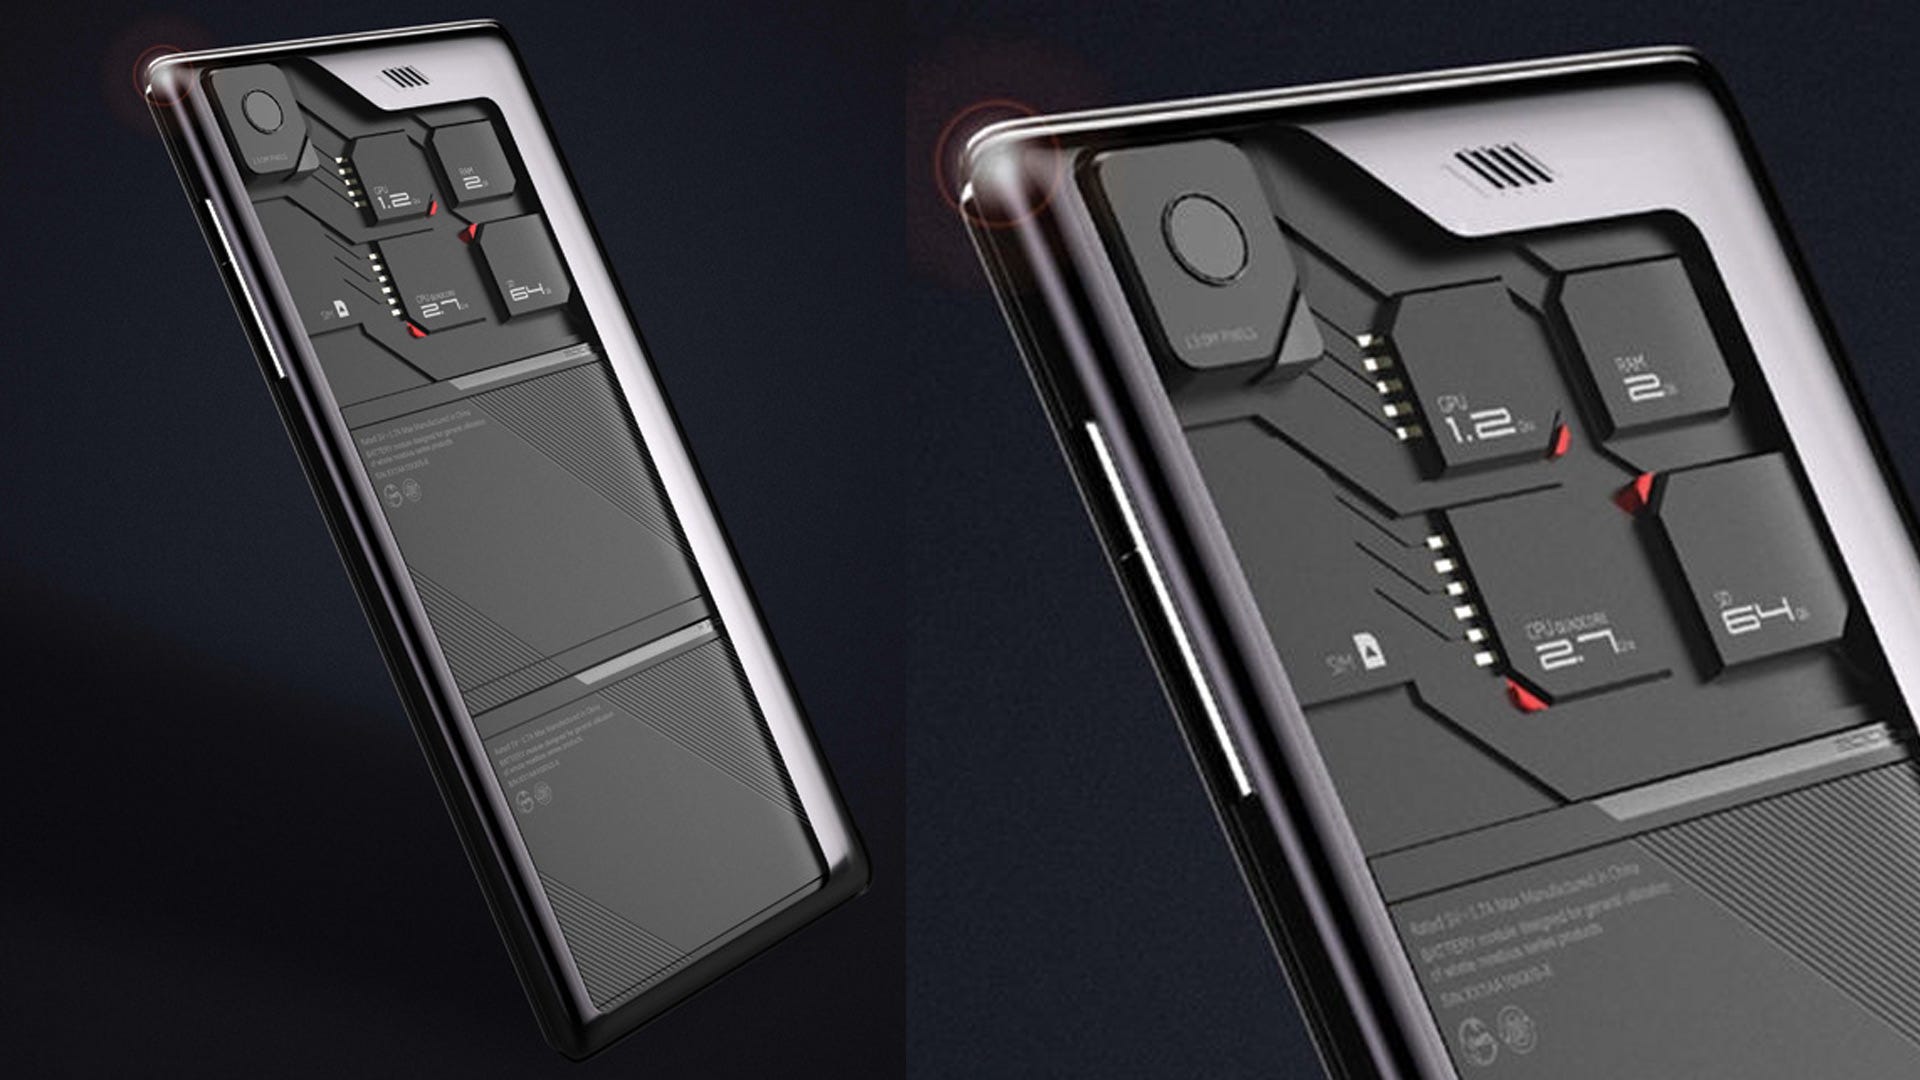 Here’s the — probably one of the smartest modular phones out now